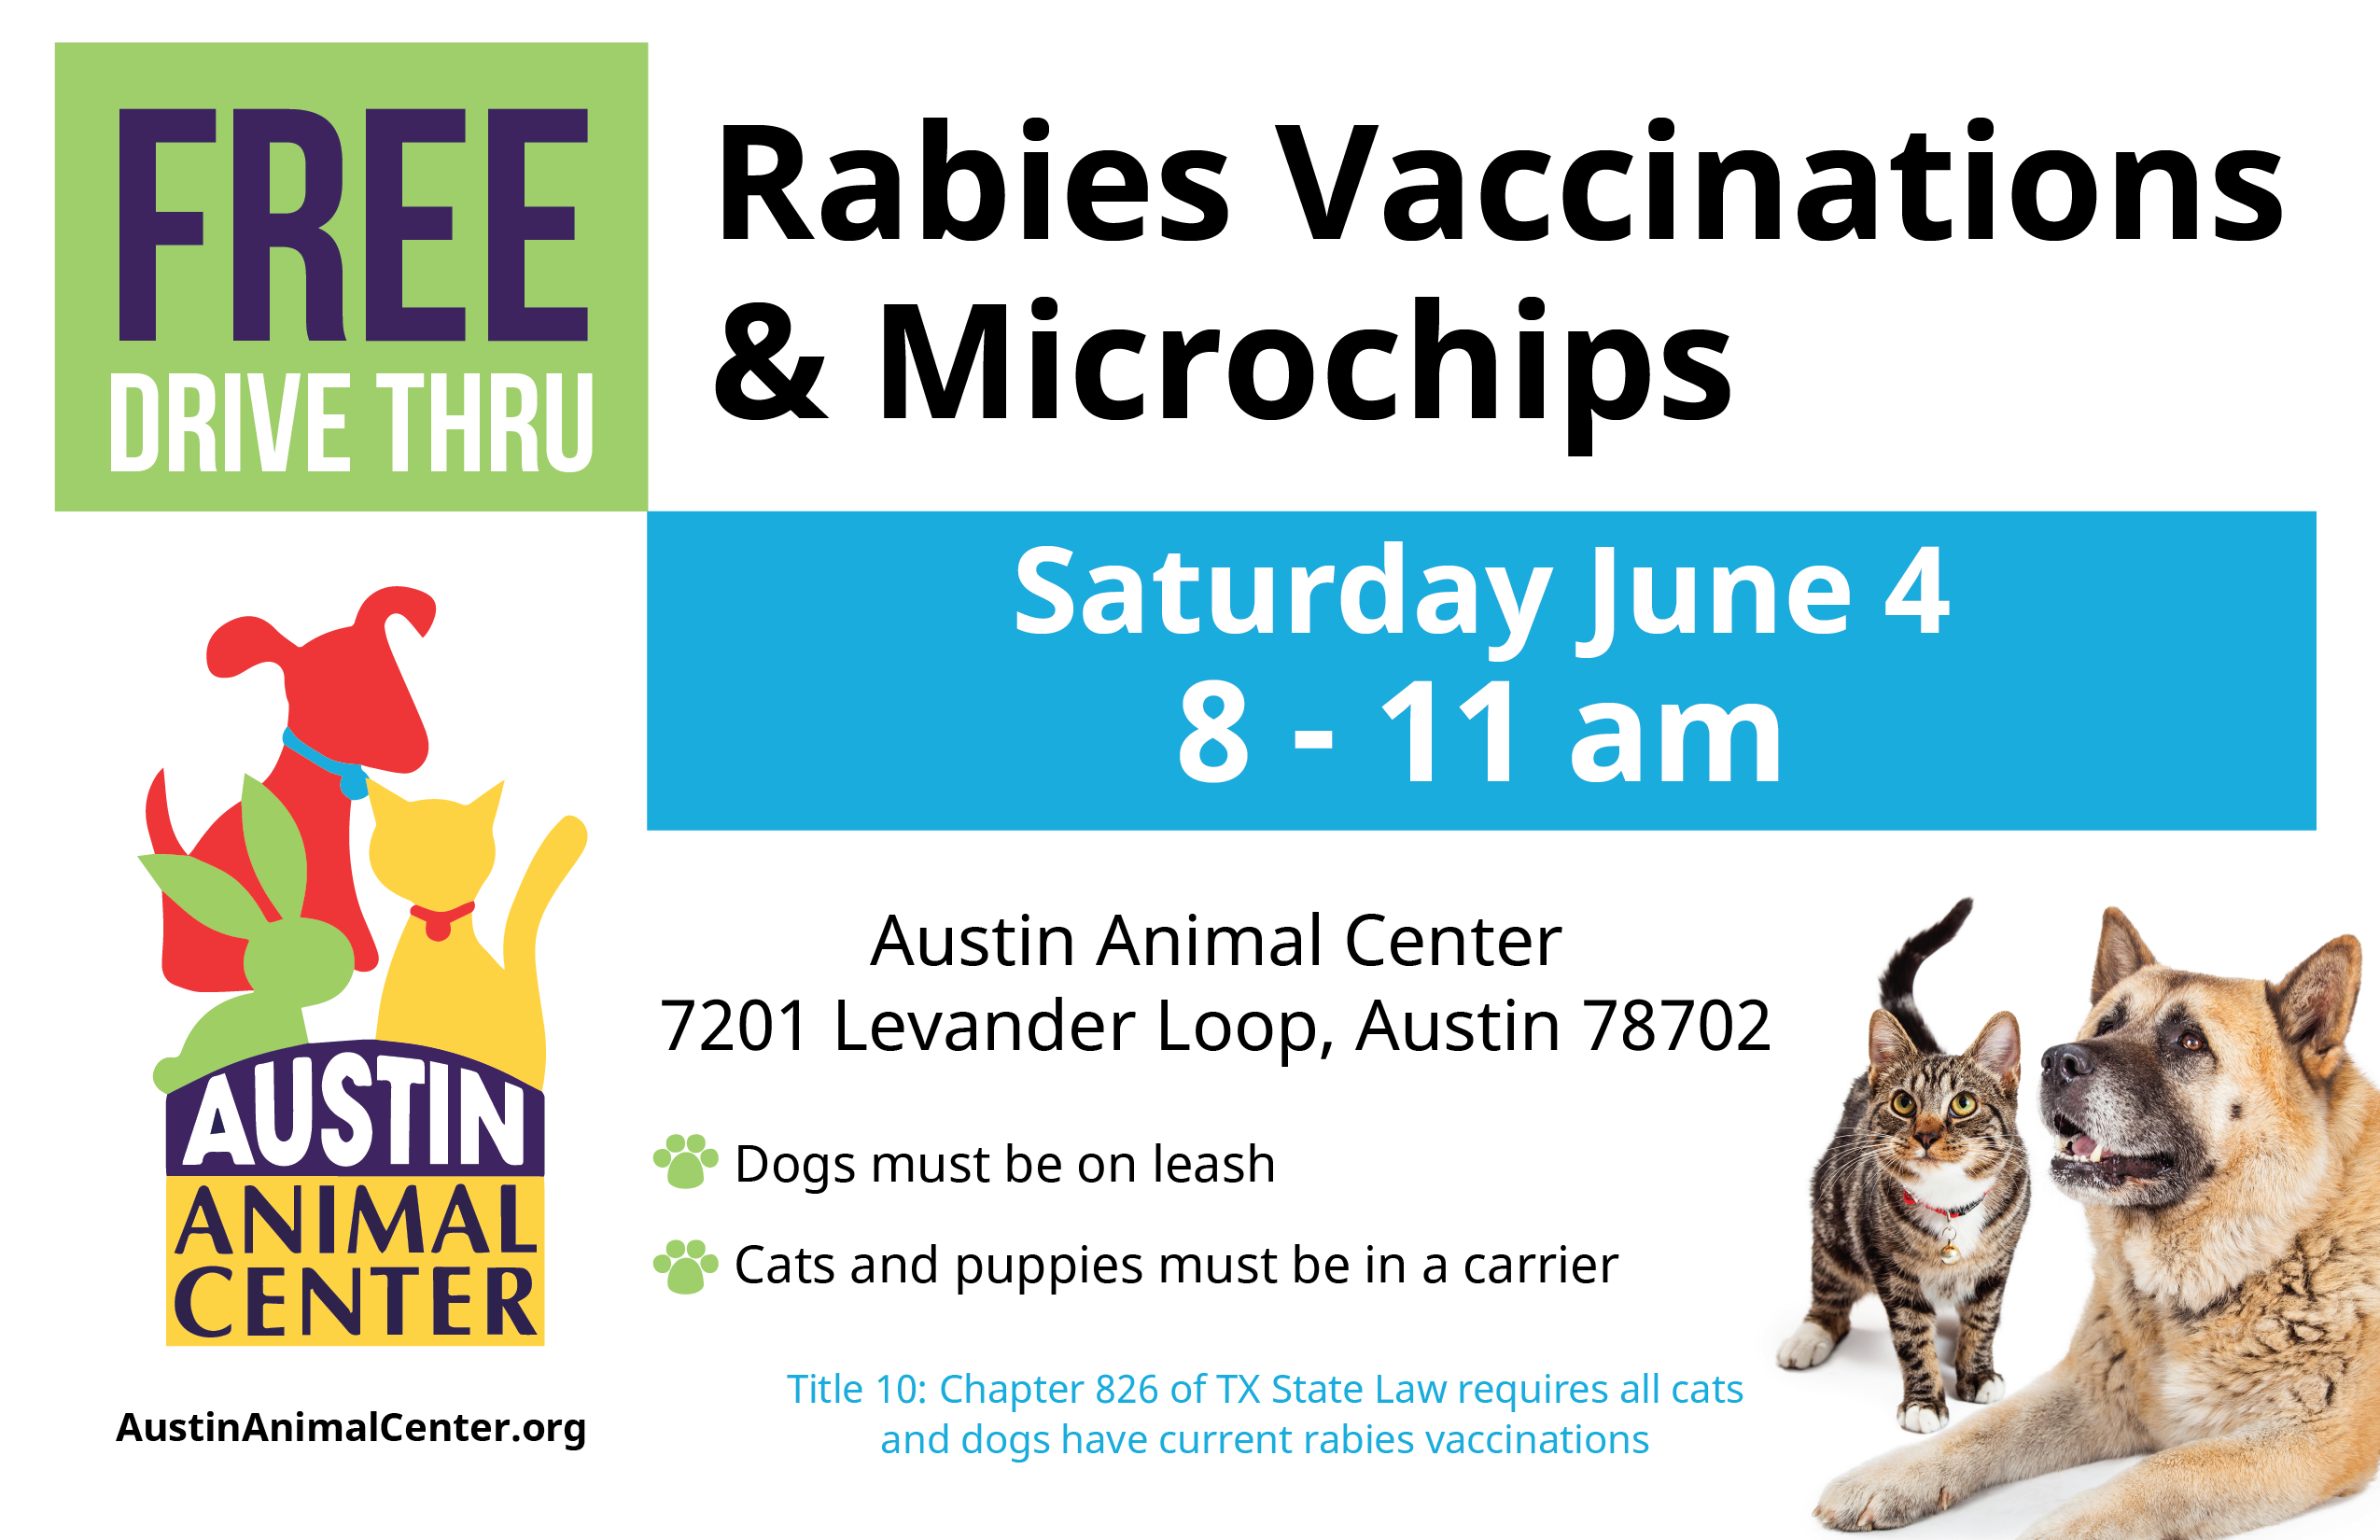 Free drive-thru rabies vaccinations and microchips